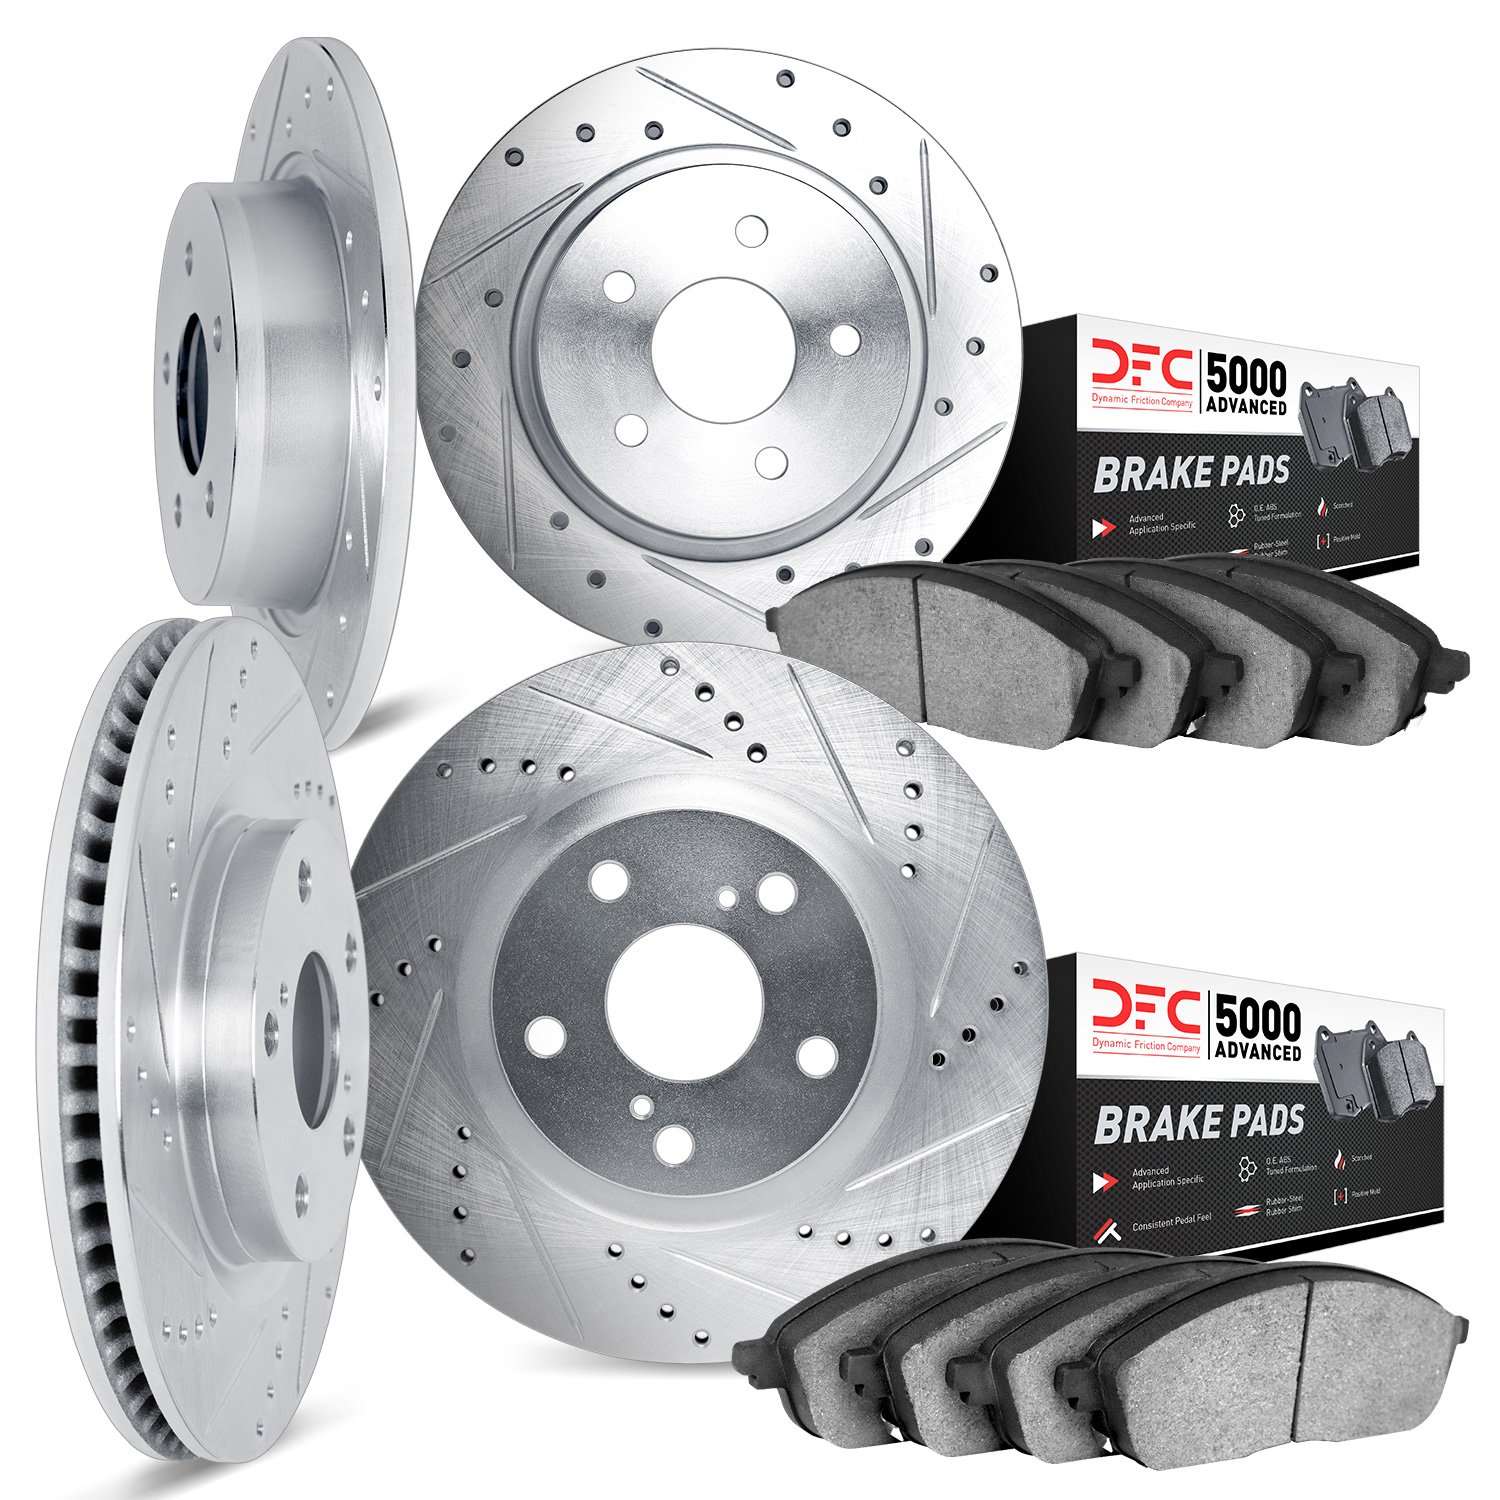 7504-39023 Drilled/Slotted Brake Rotors w/5000 Advanced Brake Pads Kit [Silver], Fits Select Mopar, Position: Front and Rear